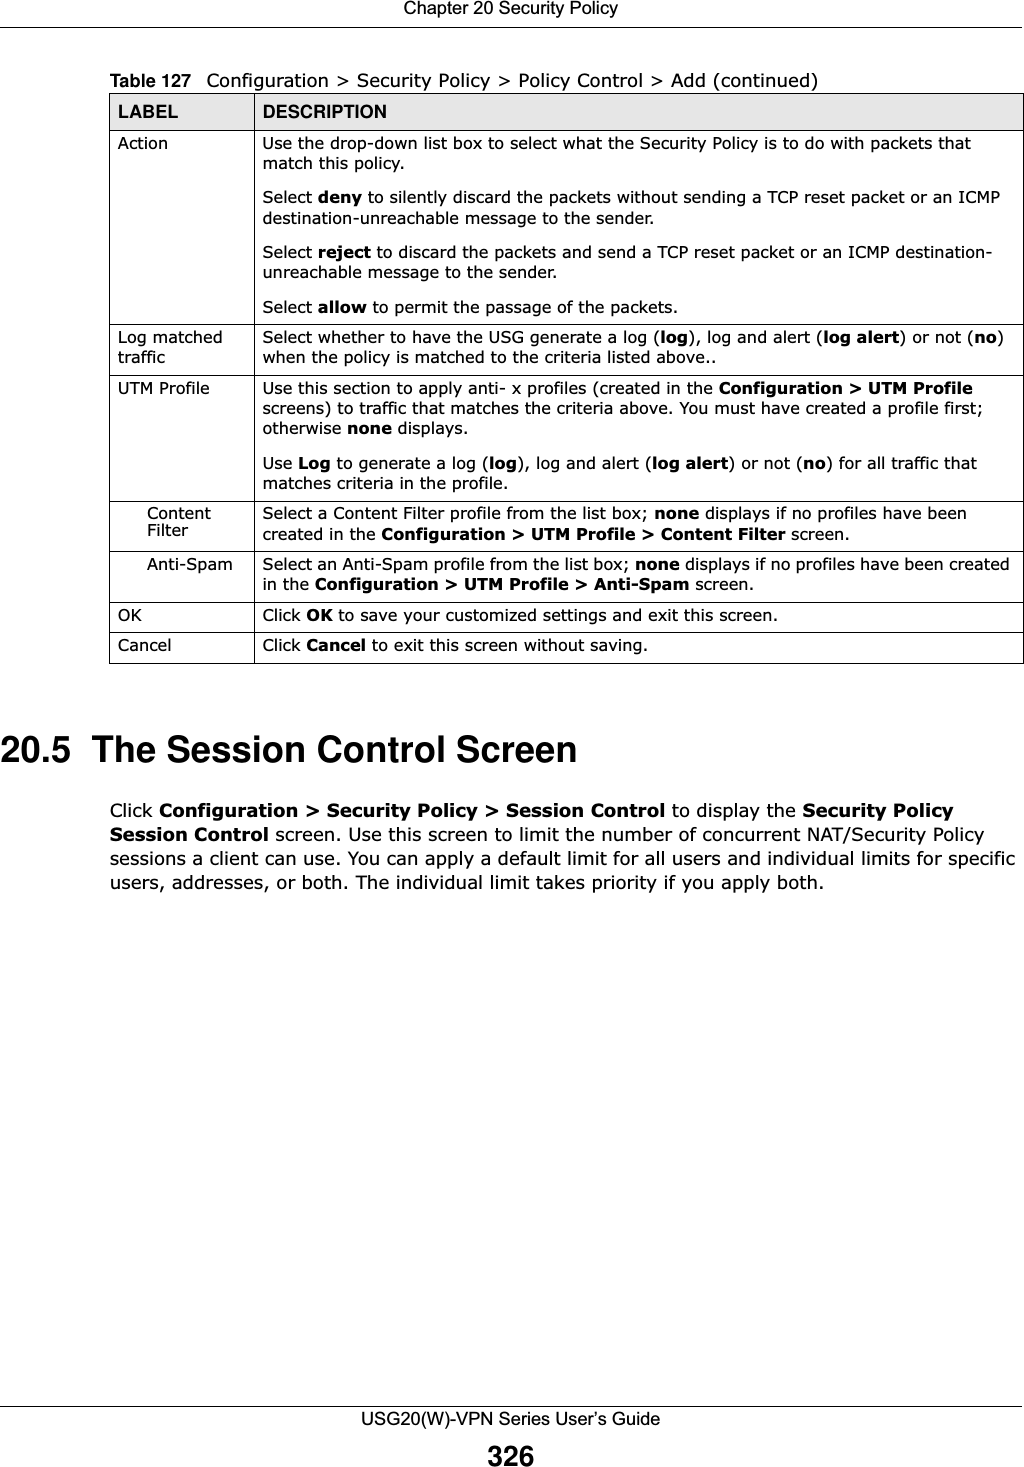 Chapter 20 Security PolicyUSG20(W)-VPN Series User’s Guide32620.5  The Session Control ScreenClick Configuration &gt; Security Policy &gt; Session Control to display the Security Policy Session Control screen. Use this screen to limit the number of concurrent NAT/Security Policy sessions a client can use. You can apply a default limit for all users and individual limits for specific users, addresses, or both. The individual limit takes priority if you apply both.Action Use the drop-down list box to select what the Security Policy is to do with packets that match this policy.Select deny to silently discard the packets without sending a TCP reset packet or an ICMP destination-unreachable message to the sender.Select reject to discard the packets and send a TCP reset packet or an ICMP destination-unreachable message to the sender.Select allow to permit the passage of the packets. Log matched trafficSelect whether to have the USG generate a log (log), log and alert (log alert) or not (no) when the policy is matched to the criteria listed above..UTM Profile Use this section to apply anti- x profiles (created in the Configuration &gt; UTM Profile screens) to traffic that matches the criteria above. You must have created a profile first; otherwise none displays. Use Log to generate a log (log), log and alert (log alert) or not (no) for all traffic that matches criteria in the profile.Content Filter Select a Content Filter profile from the list box; none displays if no profiles have been created in the Configuration &gt; UTM Profile &gt; Content Filter screen.Anti-Spam Select an Anti-Spam profile from the list box; none displays if no profiles have been created in the Configuration &gt; UTM Profile &gt; Anti-Spam screen.OK Click OK to save your customized settings and exit this screen.Cancel Click Cancel to exit this screen without saving.Table 127   Configuration &gt; Security Policy &gt; Policy Control &gt; Add (continued)LABEL DESCRIPTION